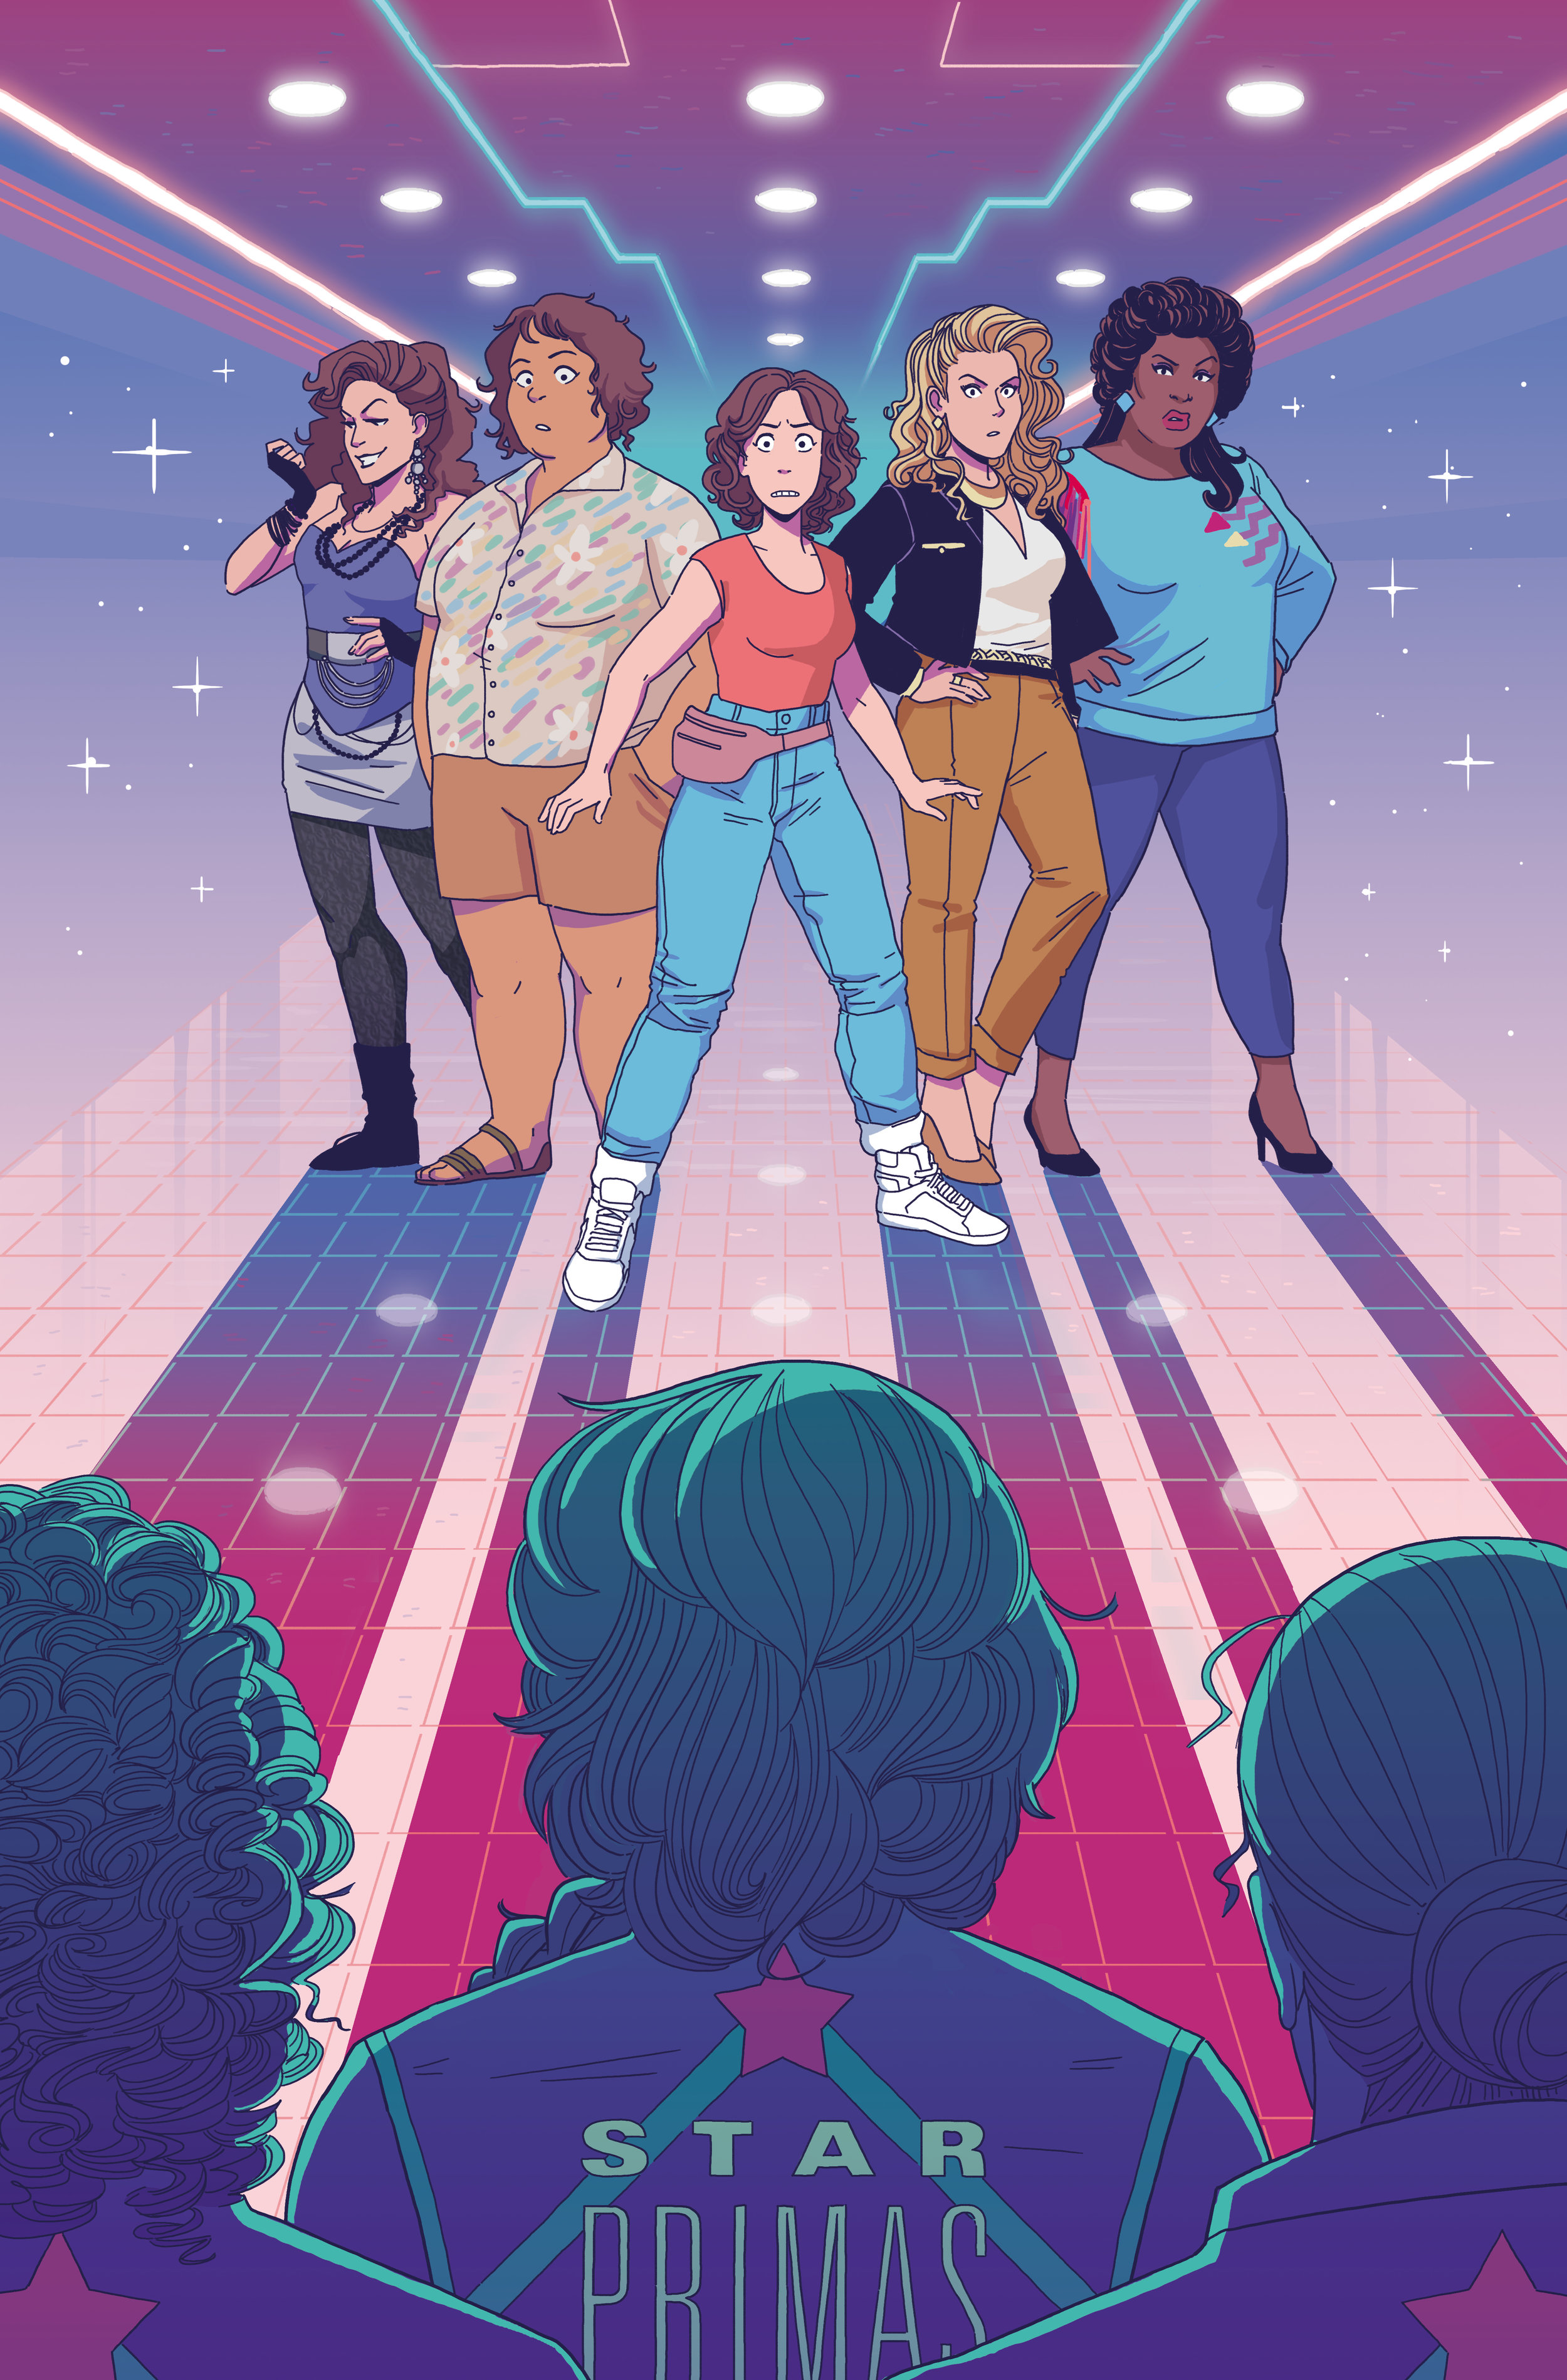  Cover  - GLOW #2  - IDW   View Interview »  